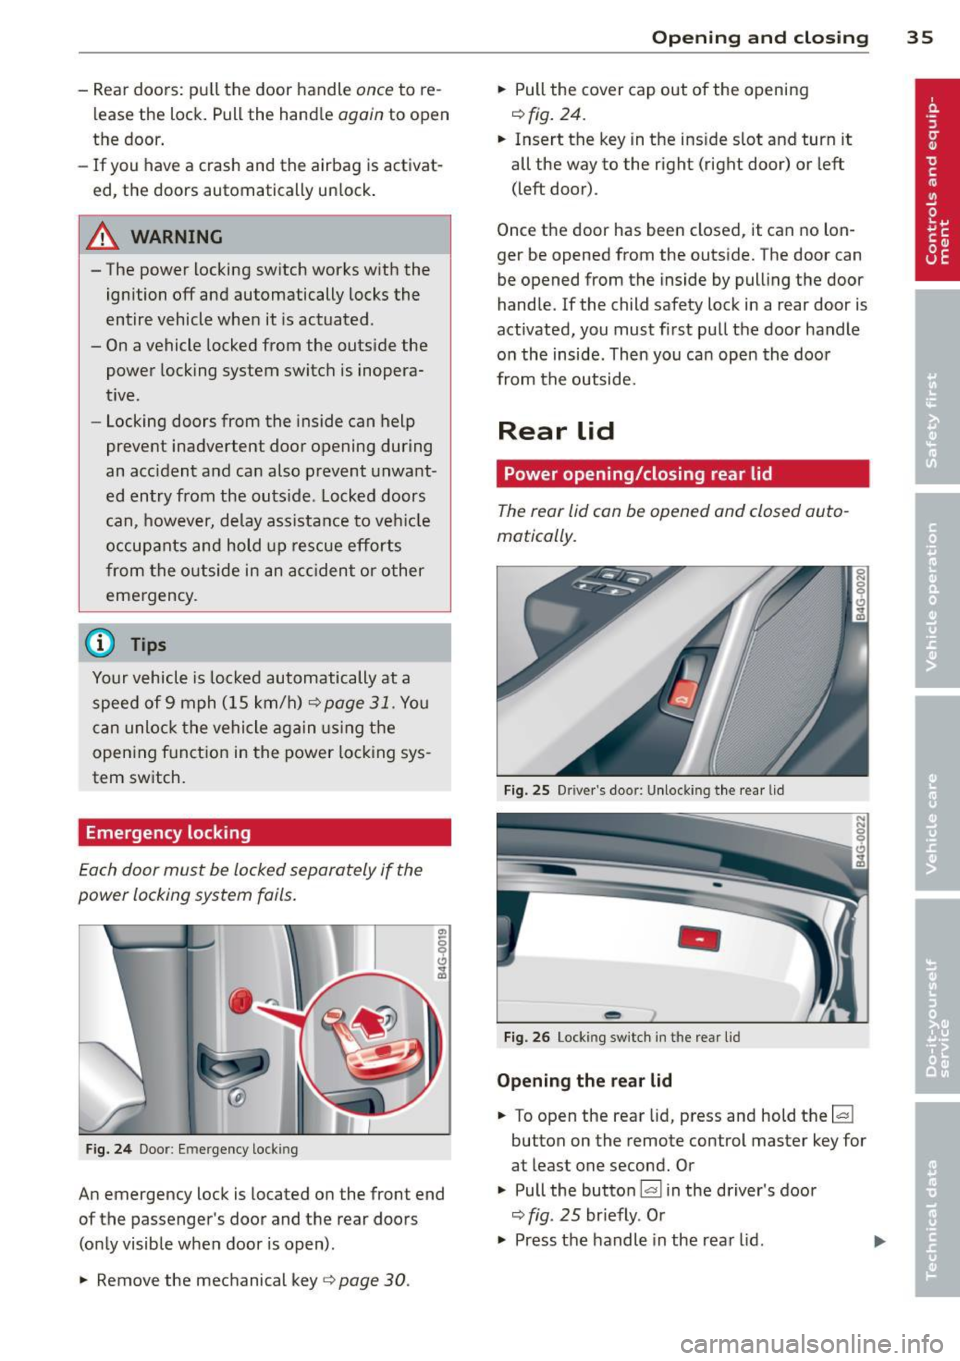 AUDI S7 2012 Owners Guide - Rear  doors:  pull the  door  handle once to  re­
lease  the  lock.  Pull the  hand le 
again to  open 
the  door . 
- If  you  have  a  crash  and  the  airbag  is activat­
ed,  the  doors  autom